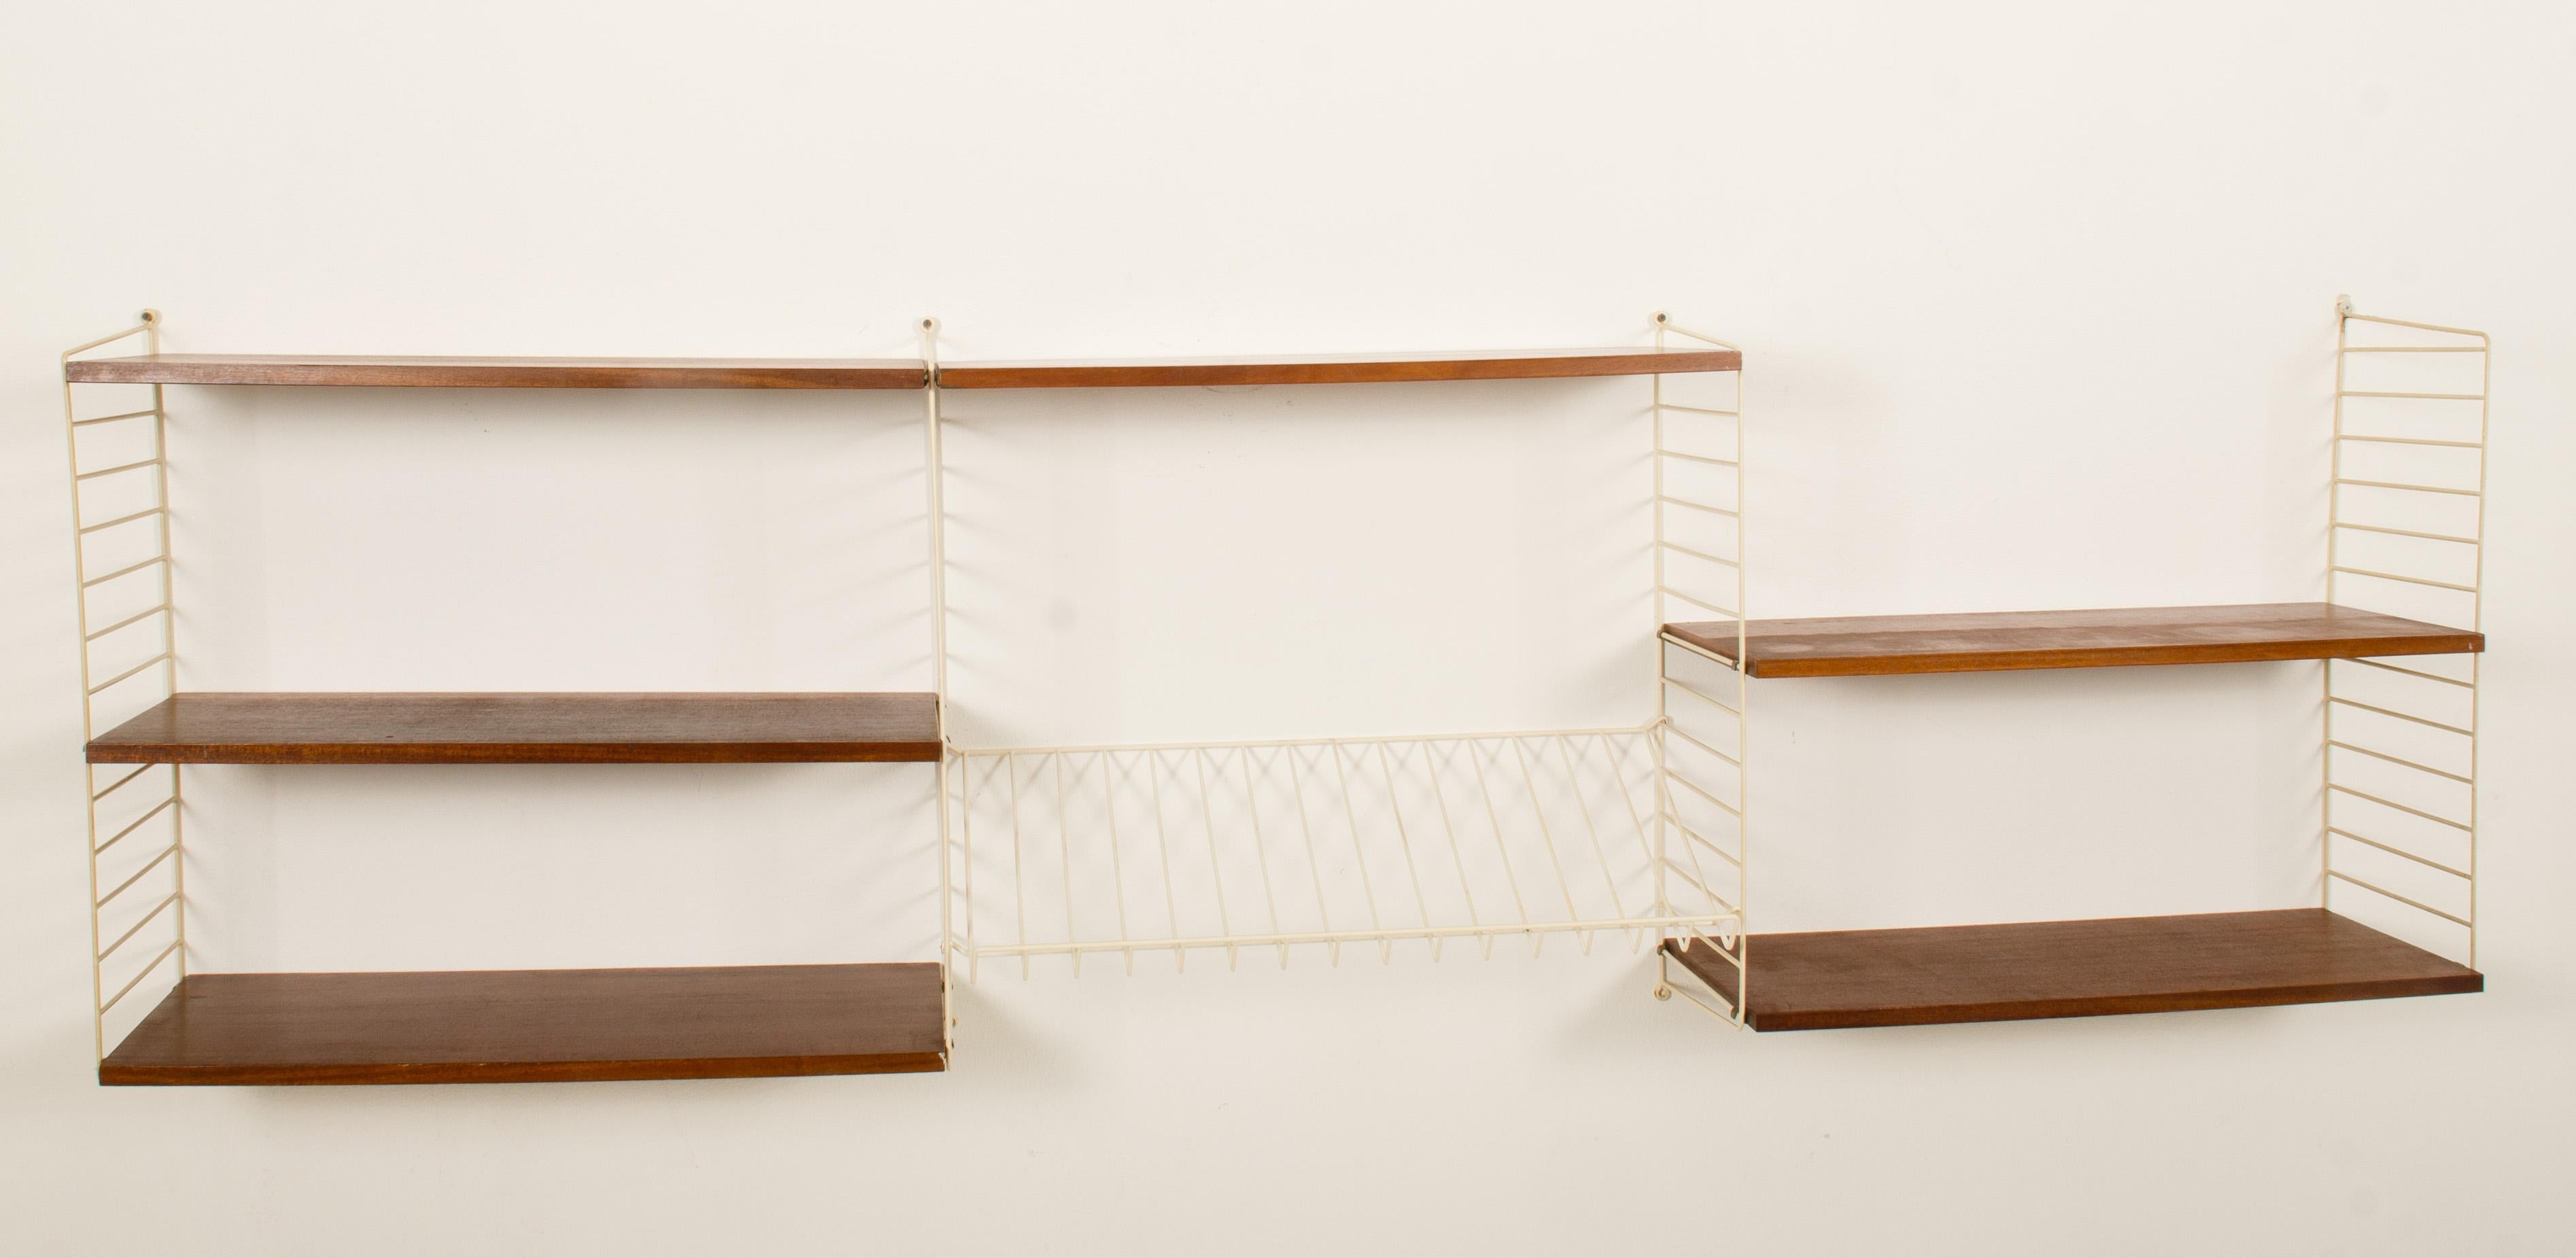 String wall shelf wall unit designed by Nils and Kajsa Strinning in 1949. This one was made in the 1960s in Sweden.
A good vintage condition, traces of use due to the age, yellowed hanger used marks on the shelf.
